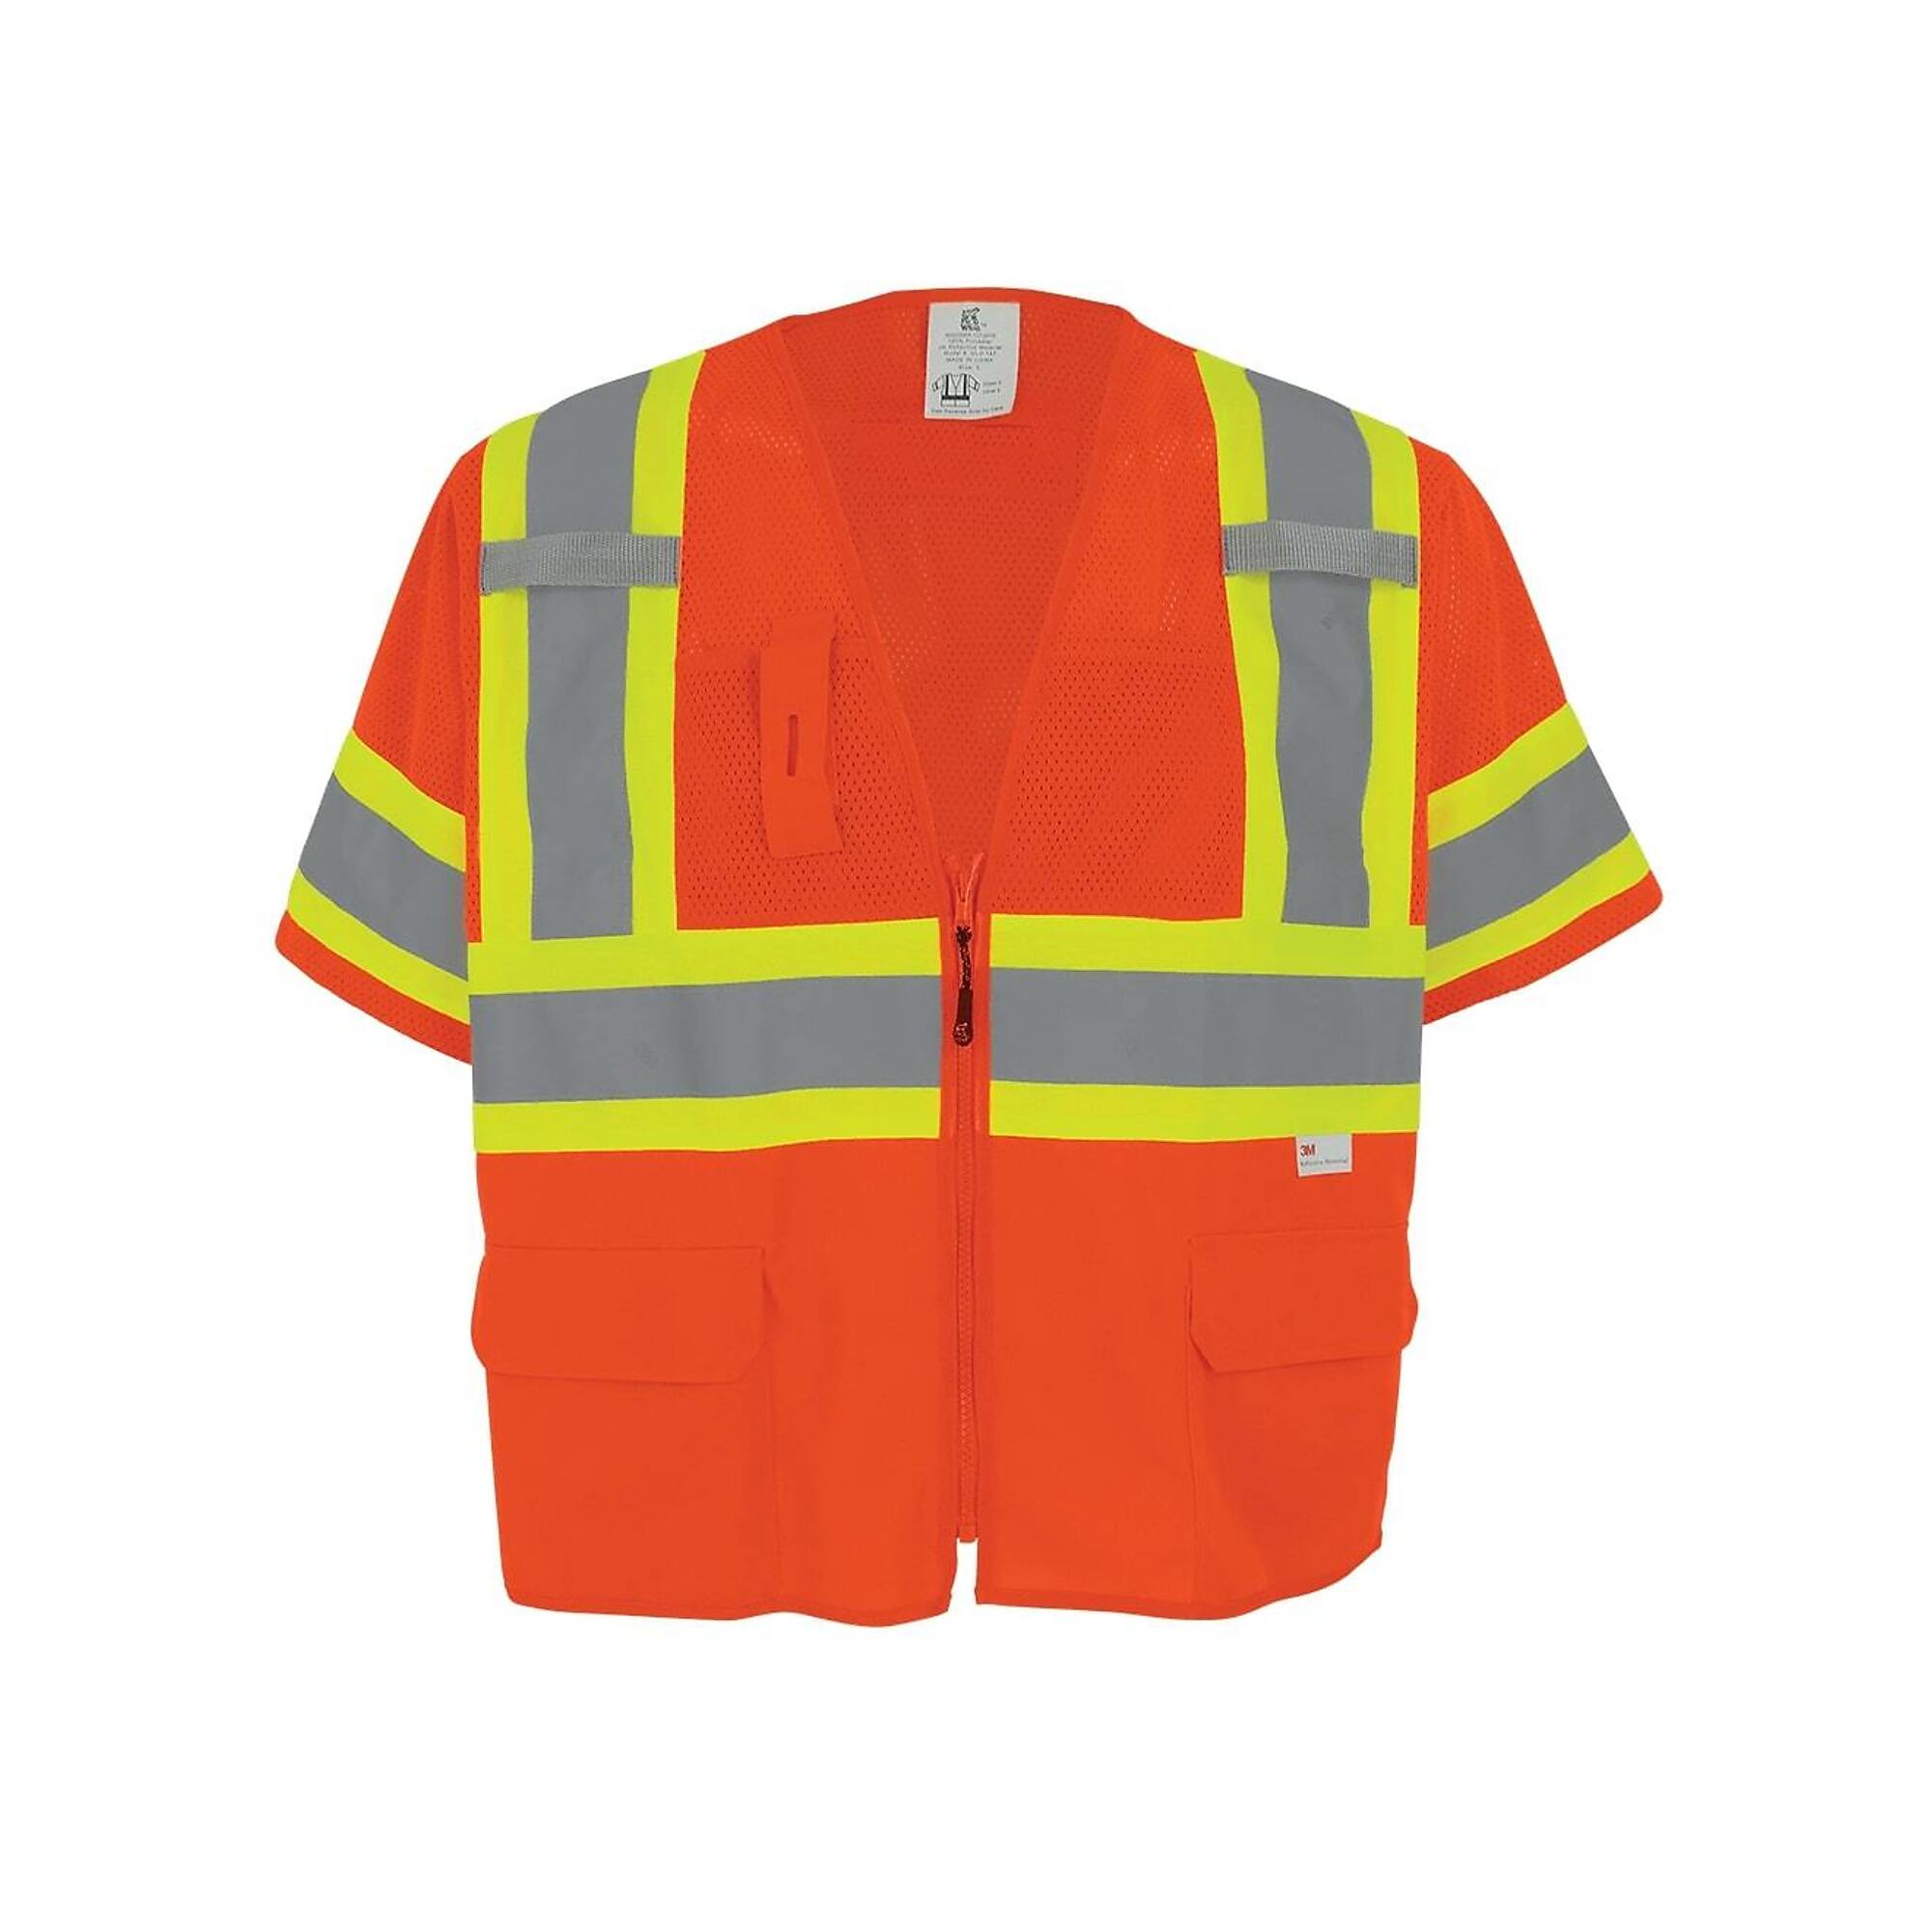 FrogWear, HV Orange, Class 3 6 Pockets, With Sleeves Solid/Mesh Vest, Size 4XL, Color High-Visibility Orange, Model GLO-147-4XL